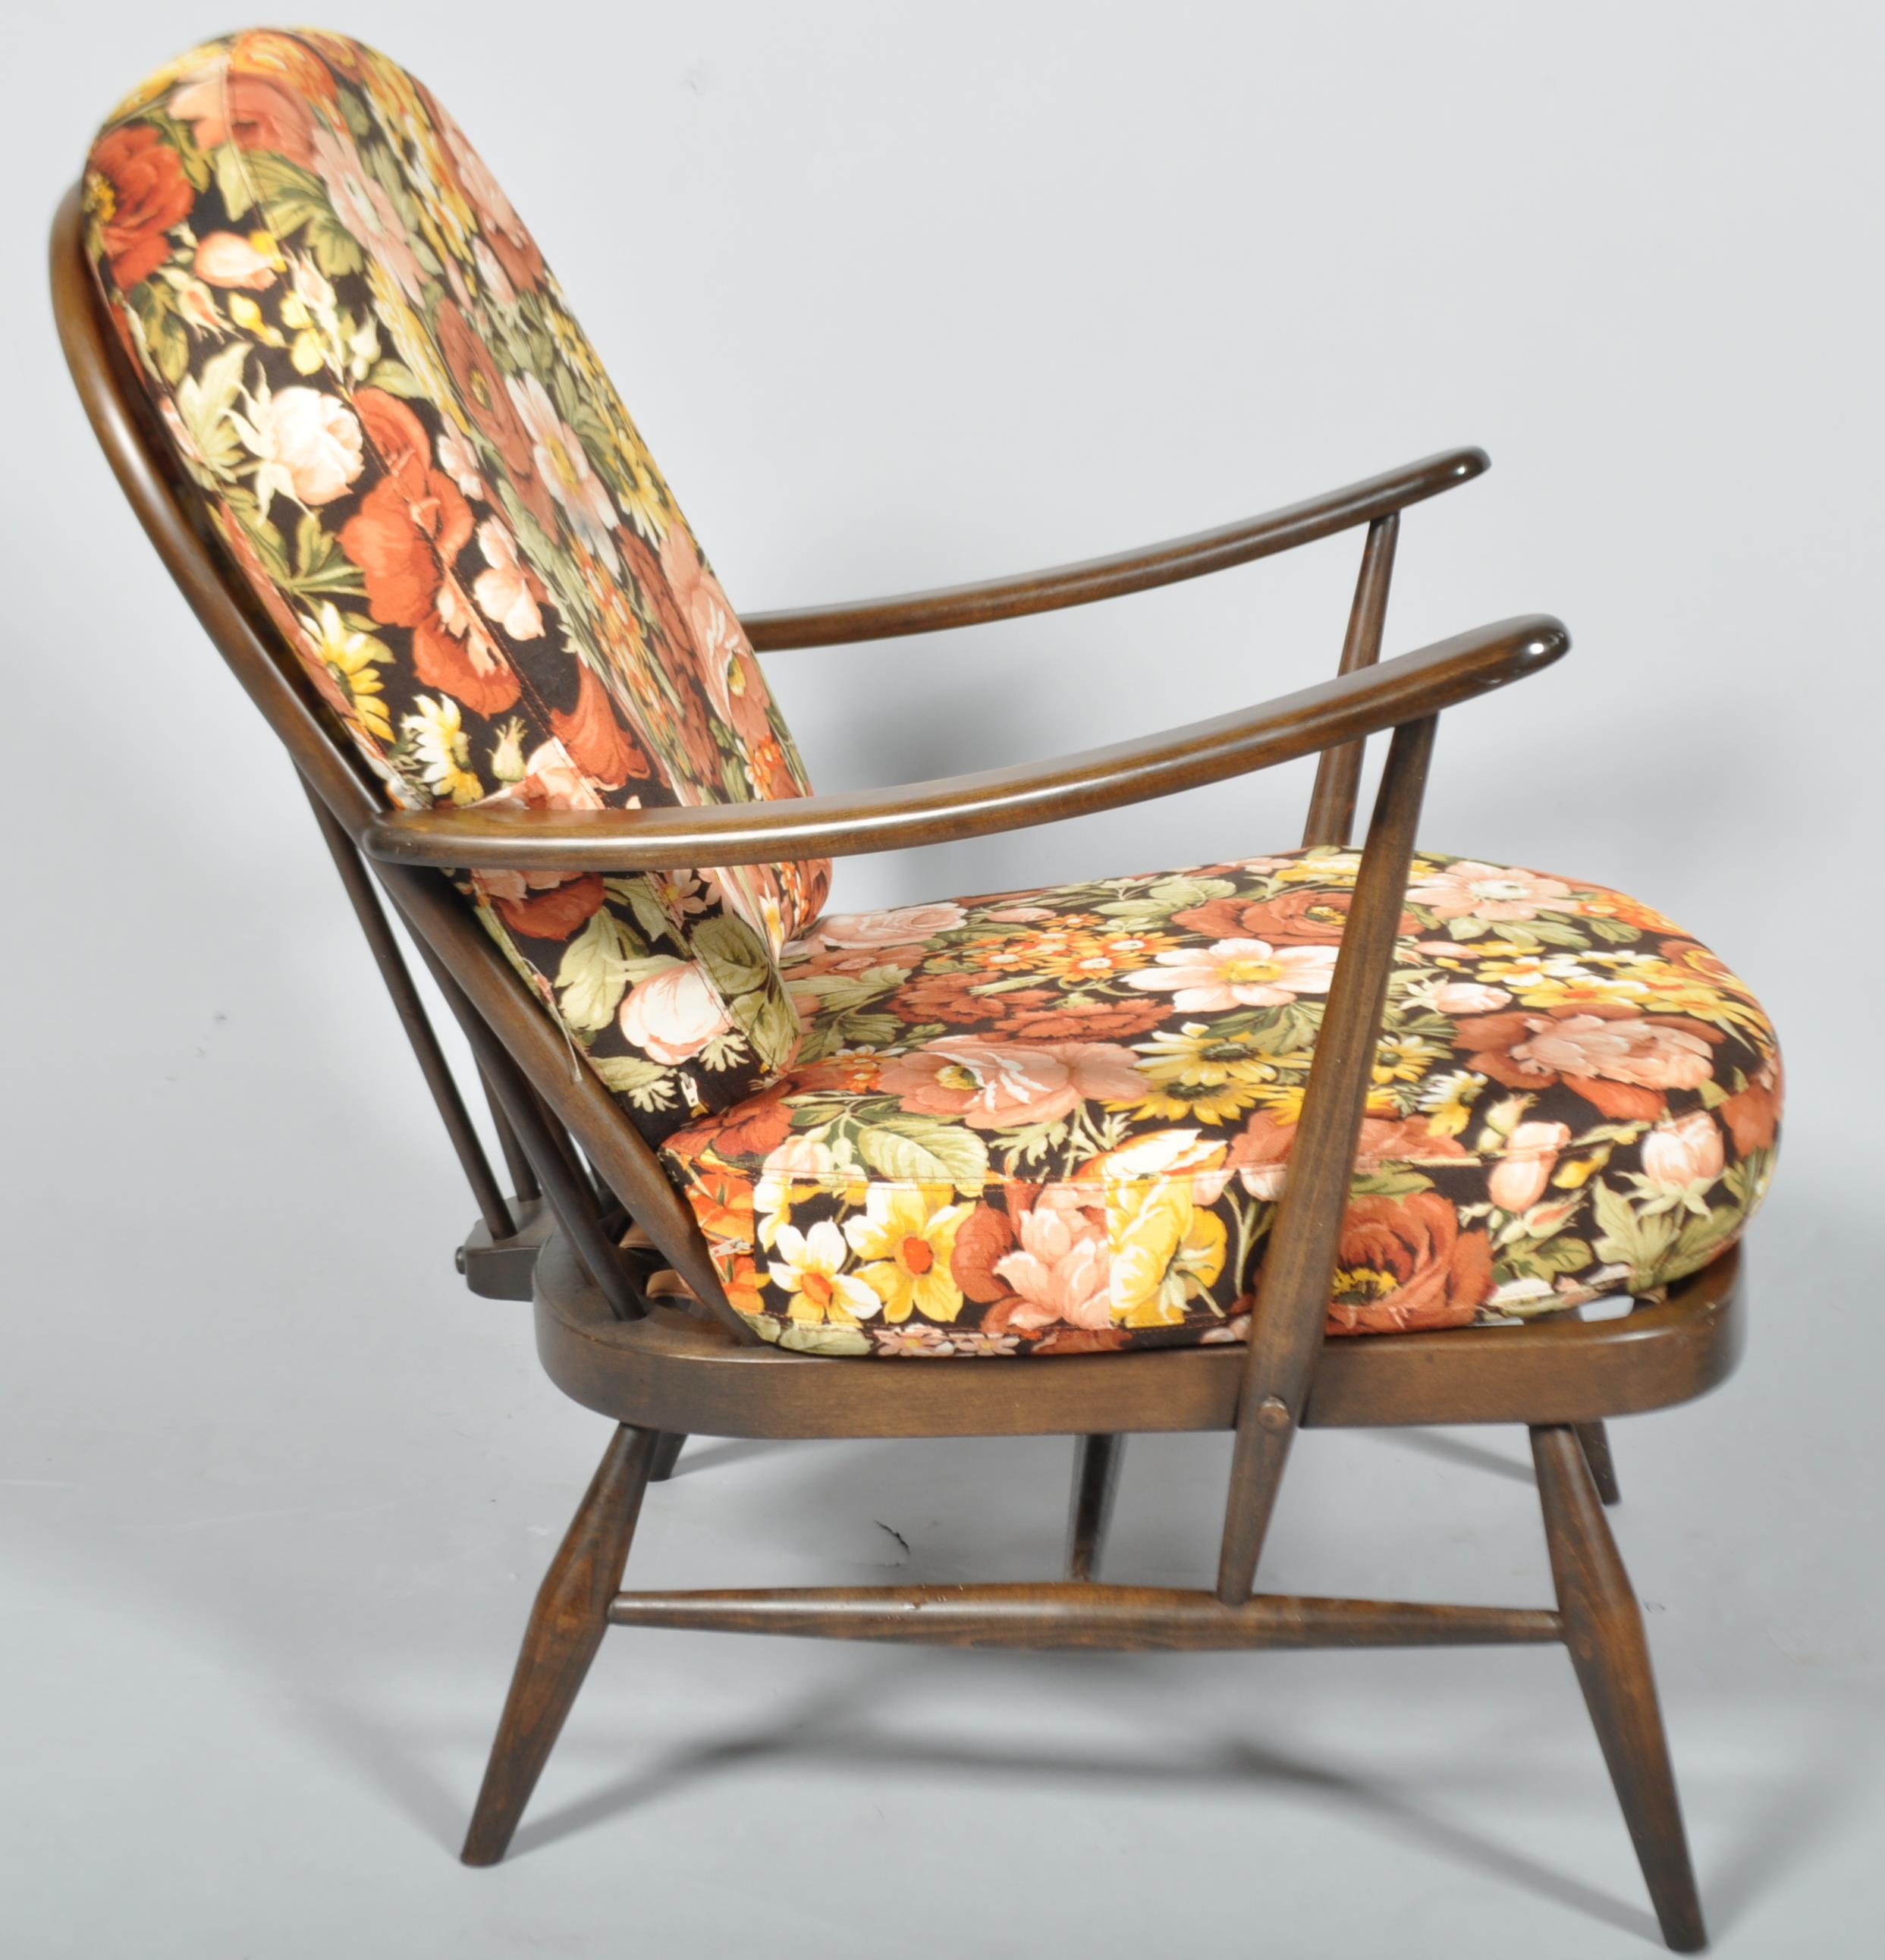 Lucian Ercoloni Ercol Model 203 1970s retro vintage beech and Elm lounge chair/armchair - Image 2 of 2